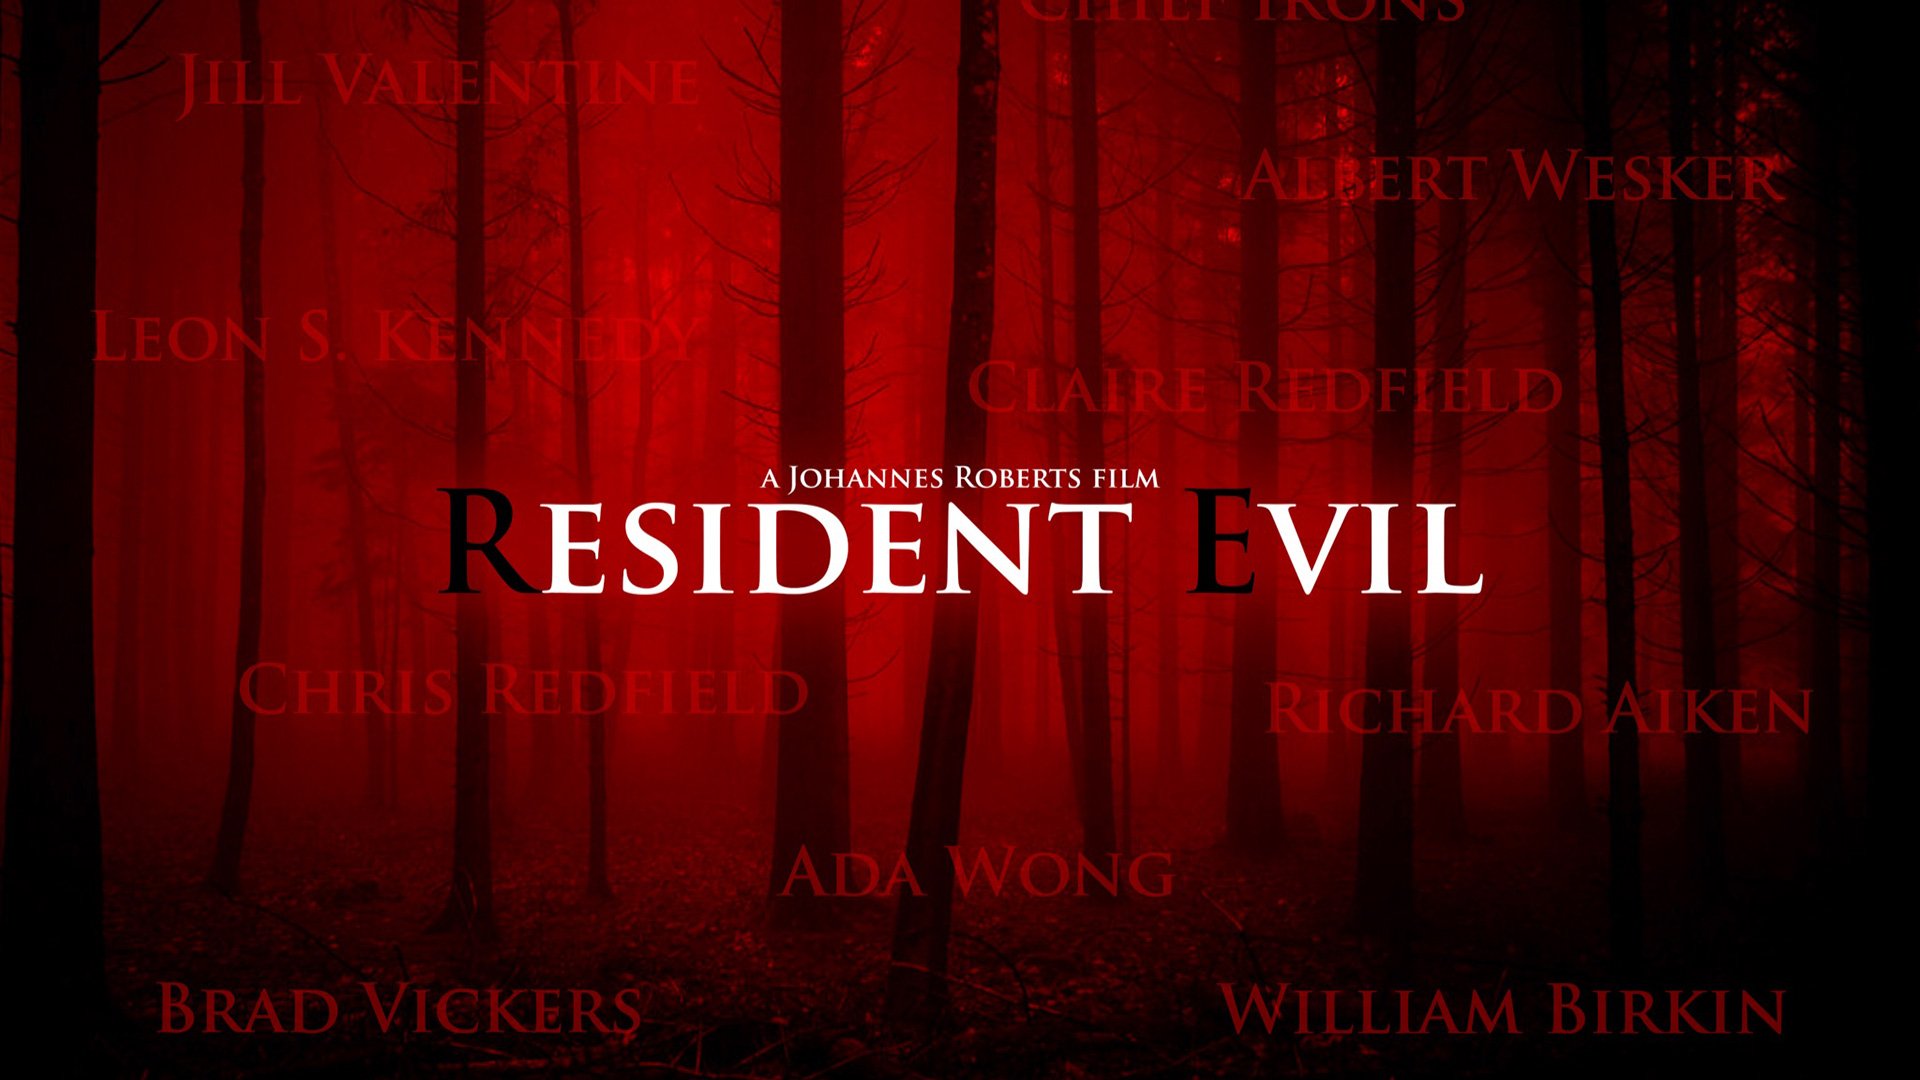 Resident Evil movie gets Sept. 3 release date, new story details